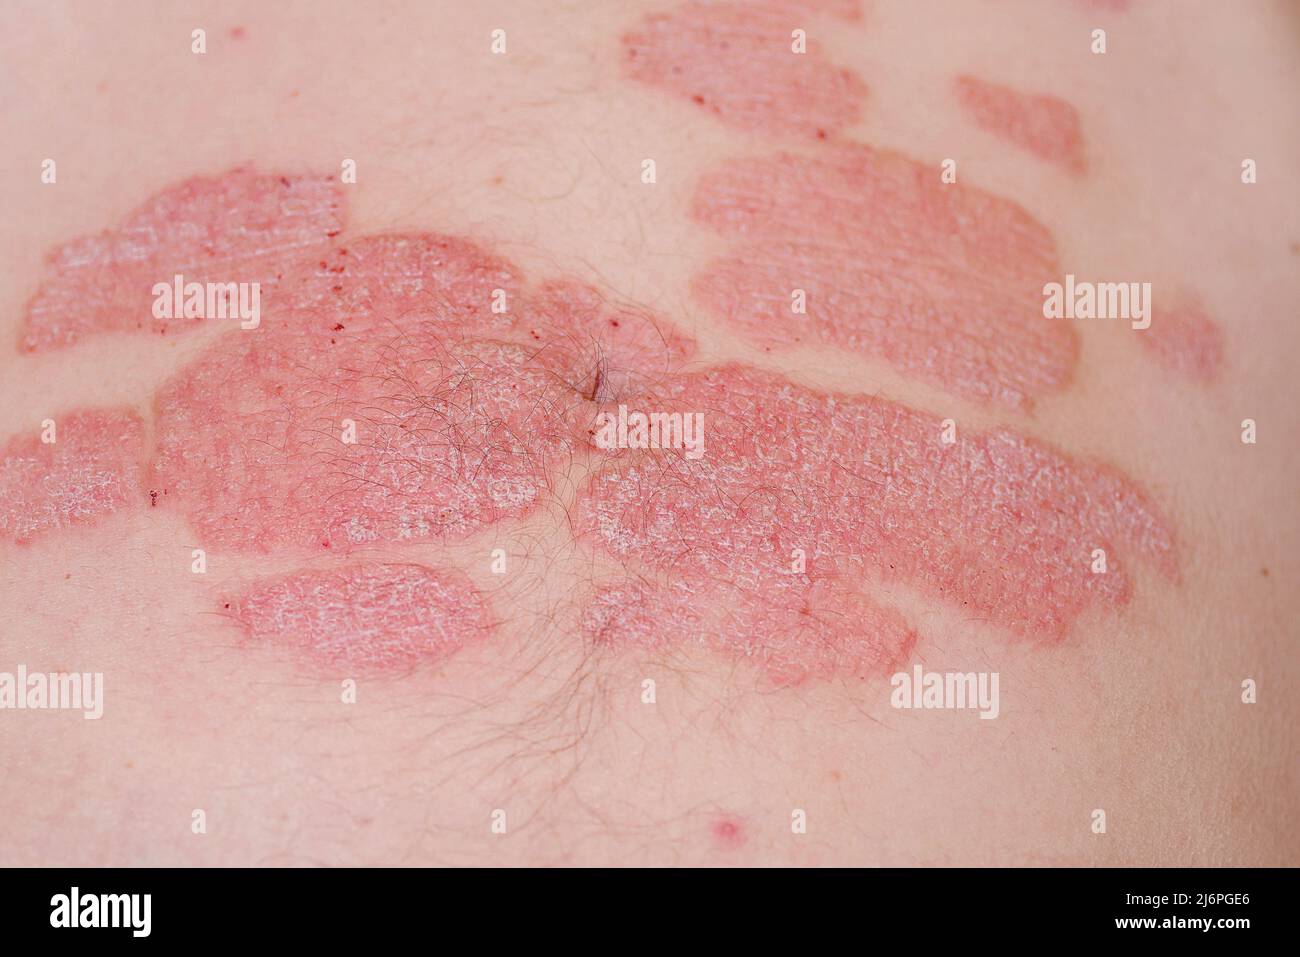 Large Red Inflamed Scaly Rash On The Stomachacute Psoriasis On The